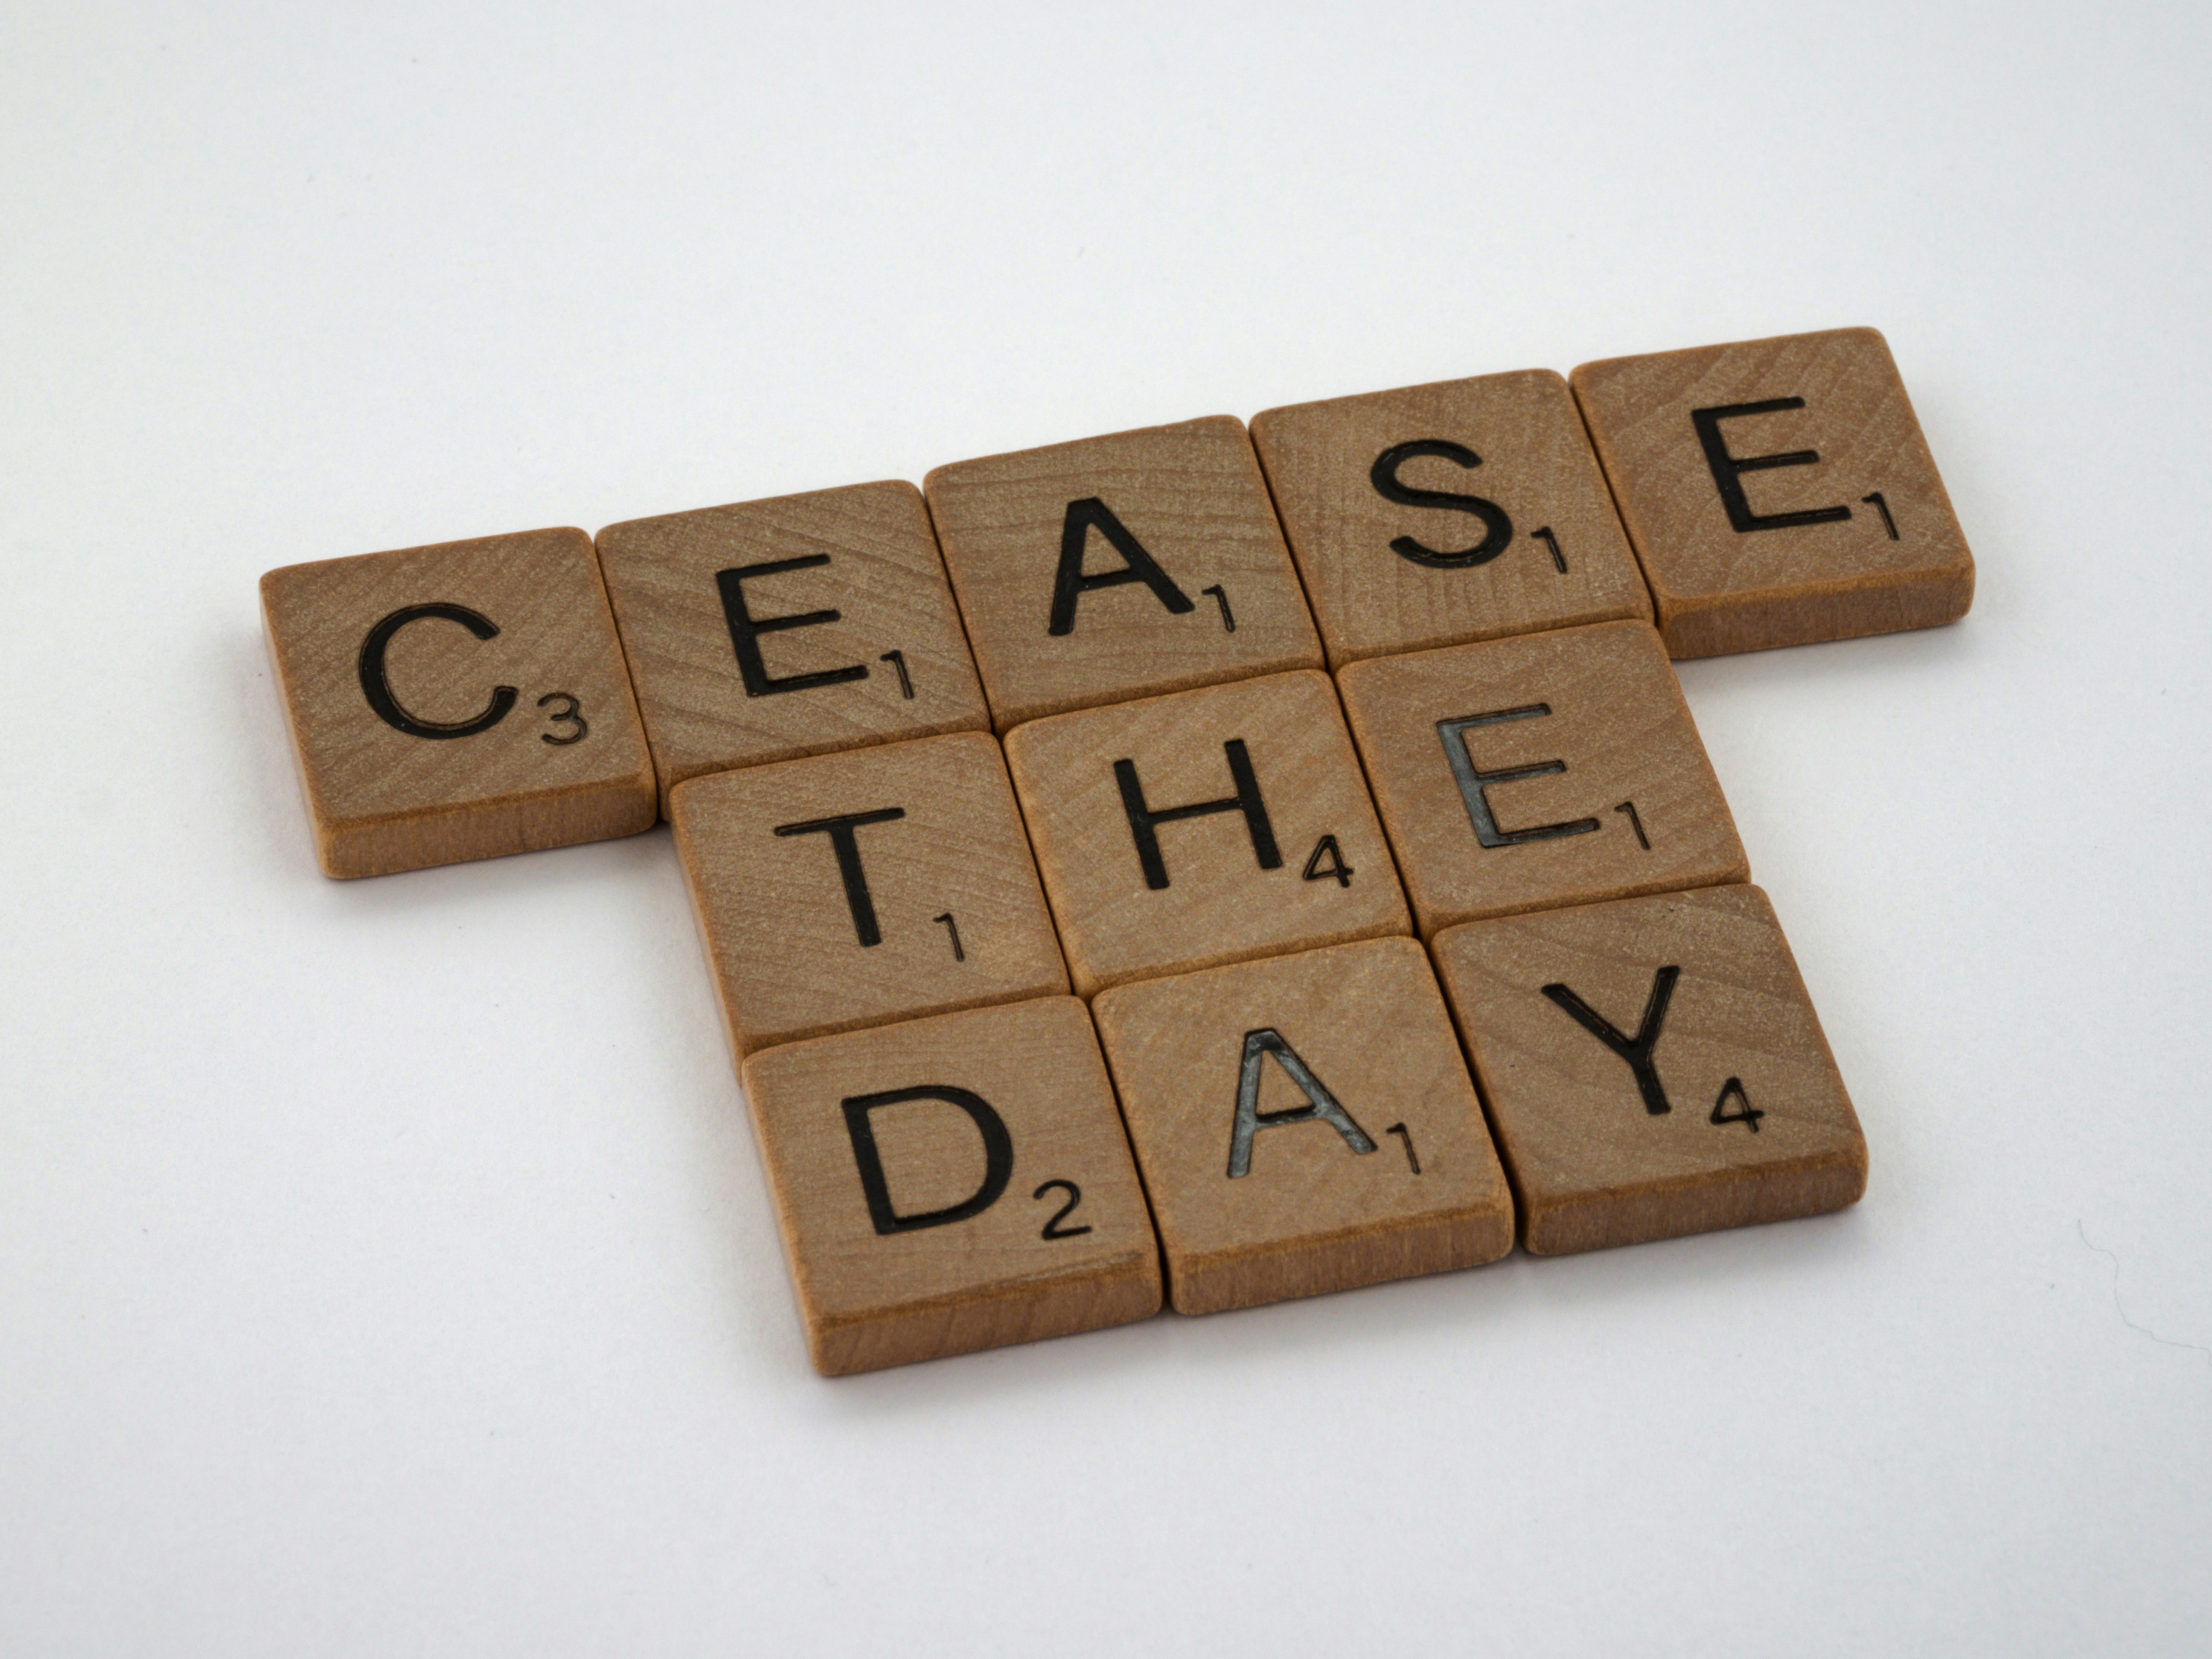 scrabble, scrabble pieces, lettering, letters, wood, scrabble tiles, white background, words, quote, letters, type, typography, design, layout, cease the day, seize the day, carpe diem, Cessare faciam hodie, night, goth, gothic, humour, homonym, homonymic, 